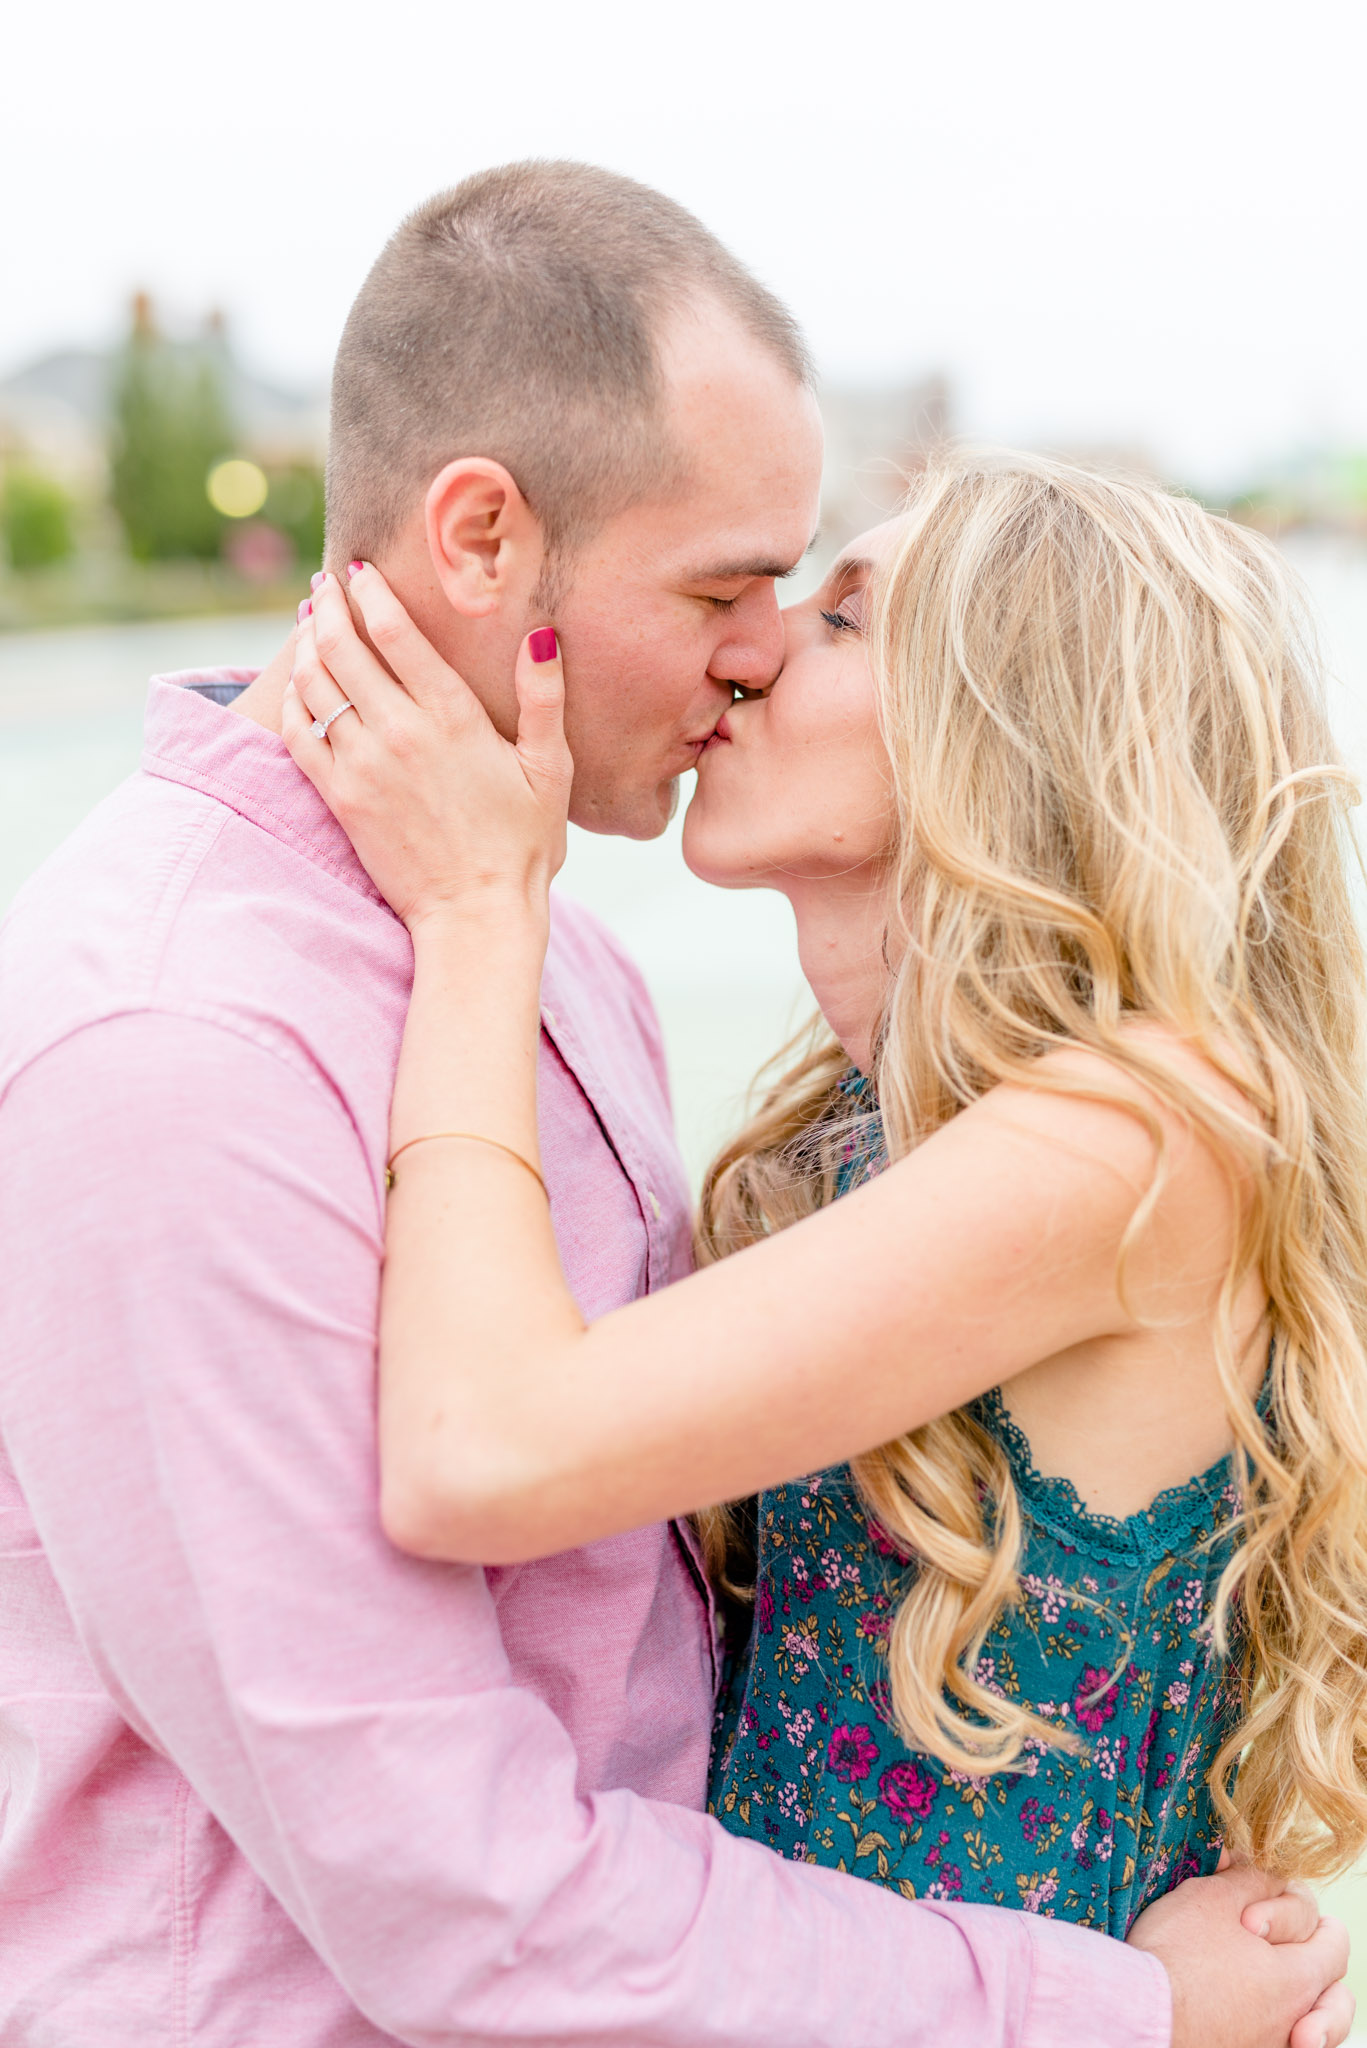 Engaged couple kisses in front of reflecting pool.